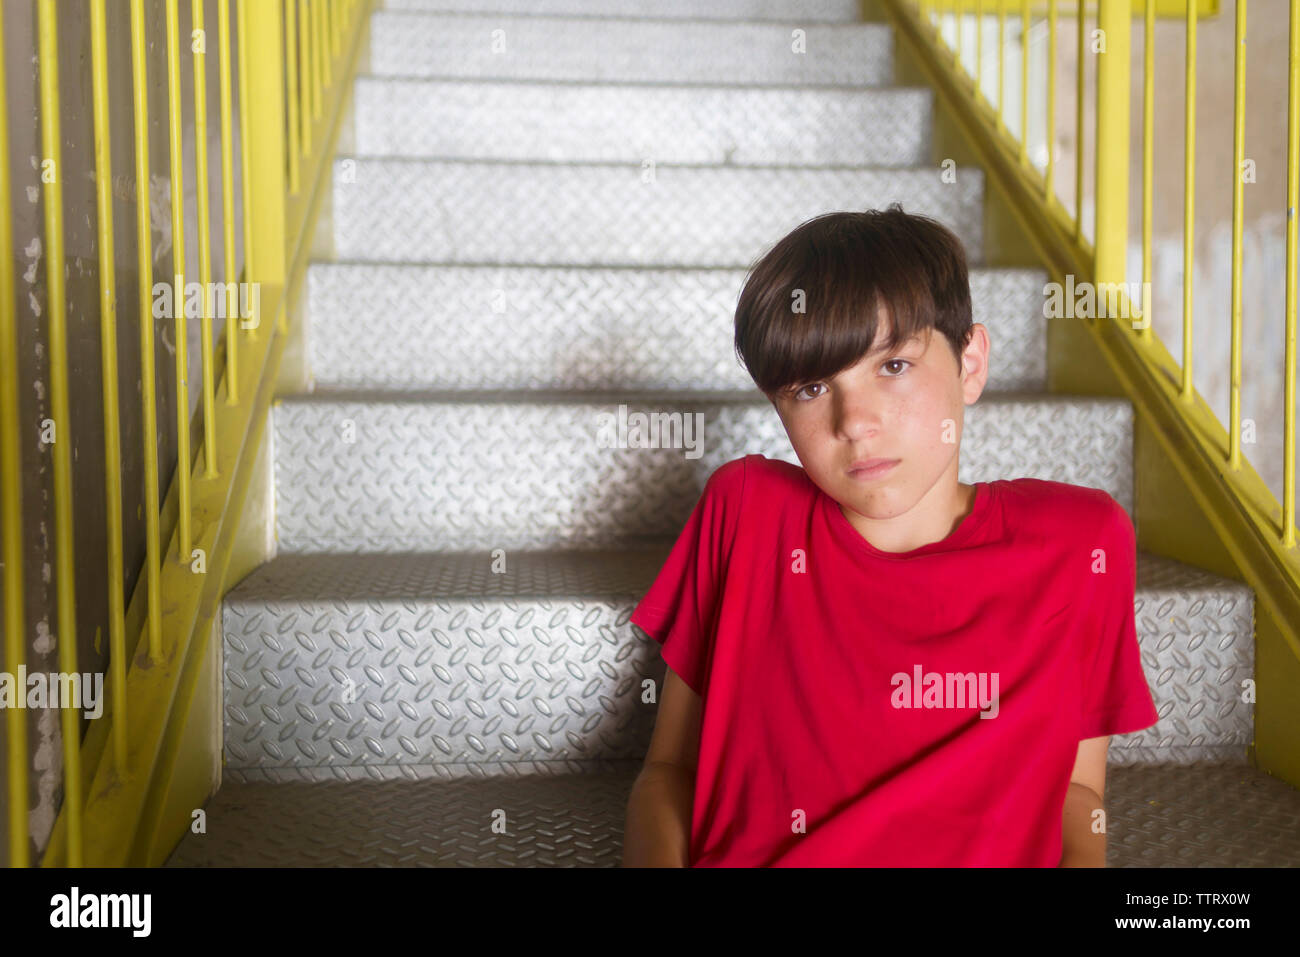 Portrait of confident student wearing red t-shirt sitting on metallic steps Stock Photo